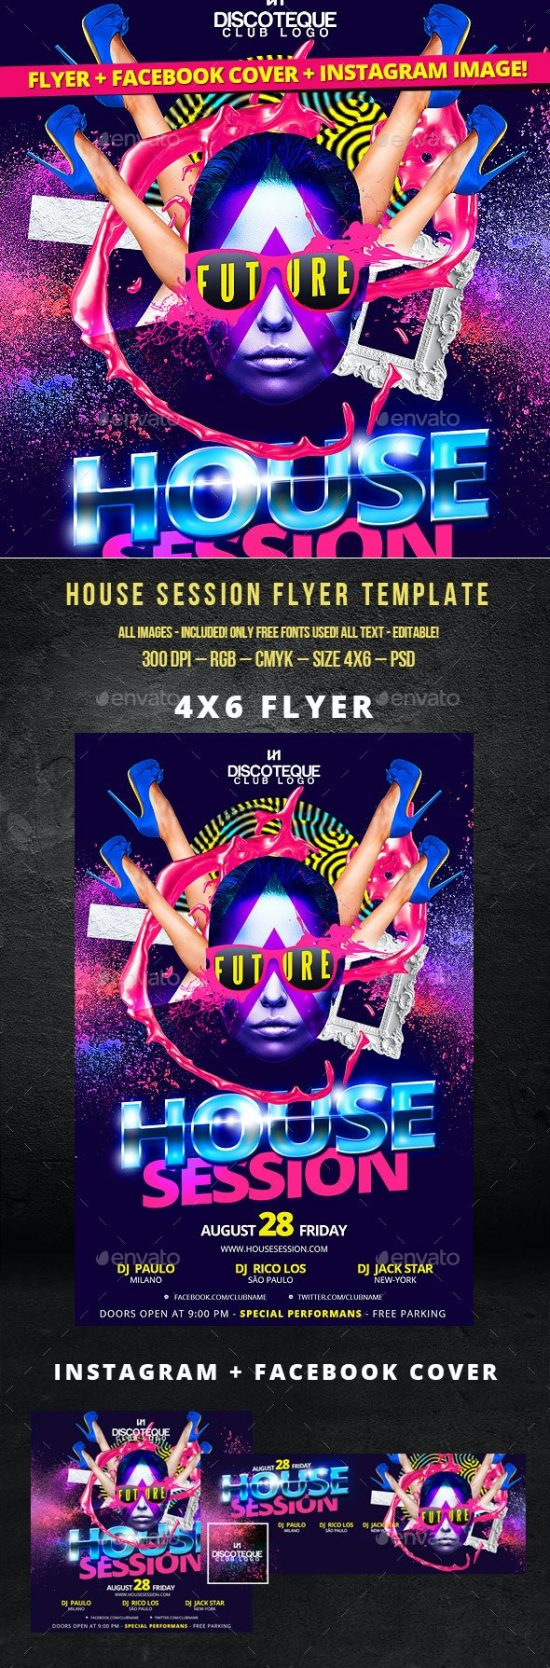 20 Free Nightclub Flyer Templates for Hot Parties Promotion  Free Throughout Free Nightclub Flyer Templates